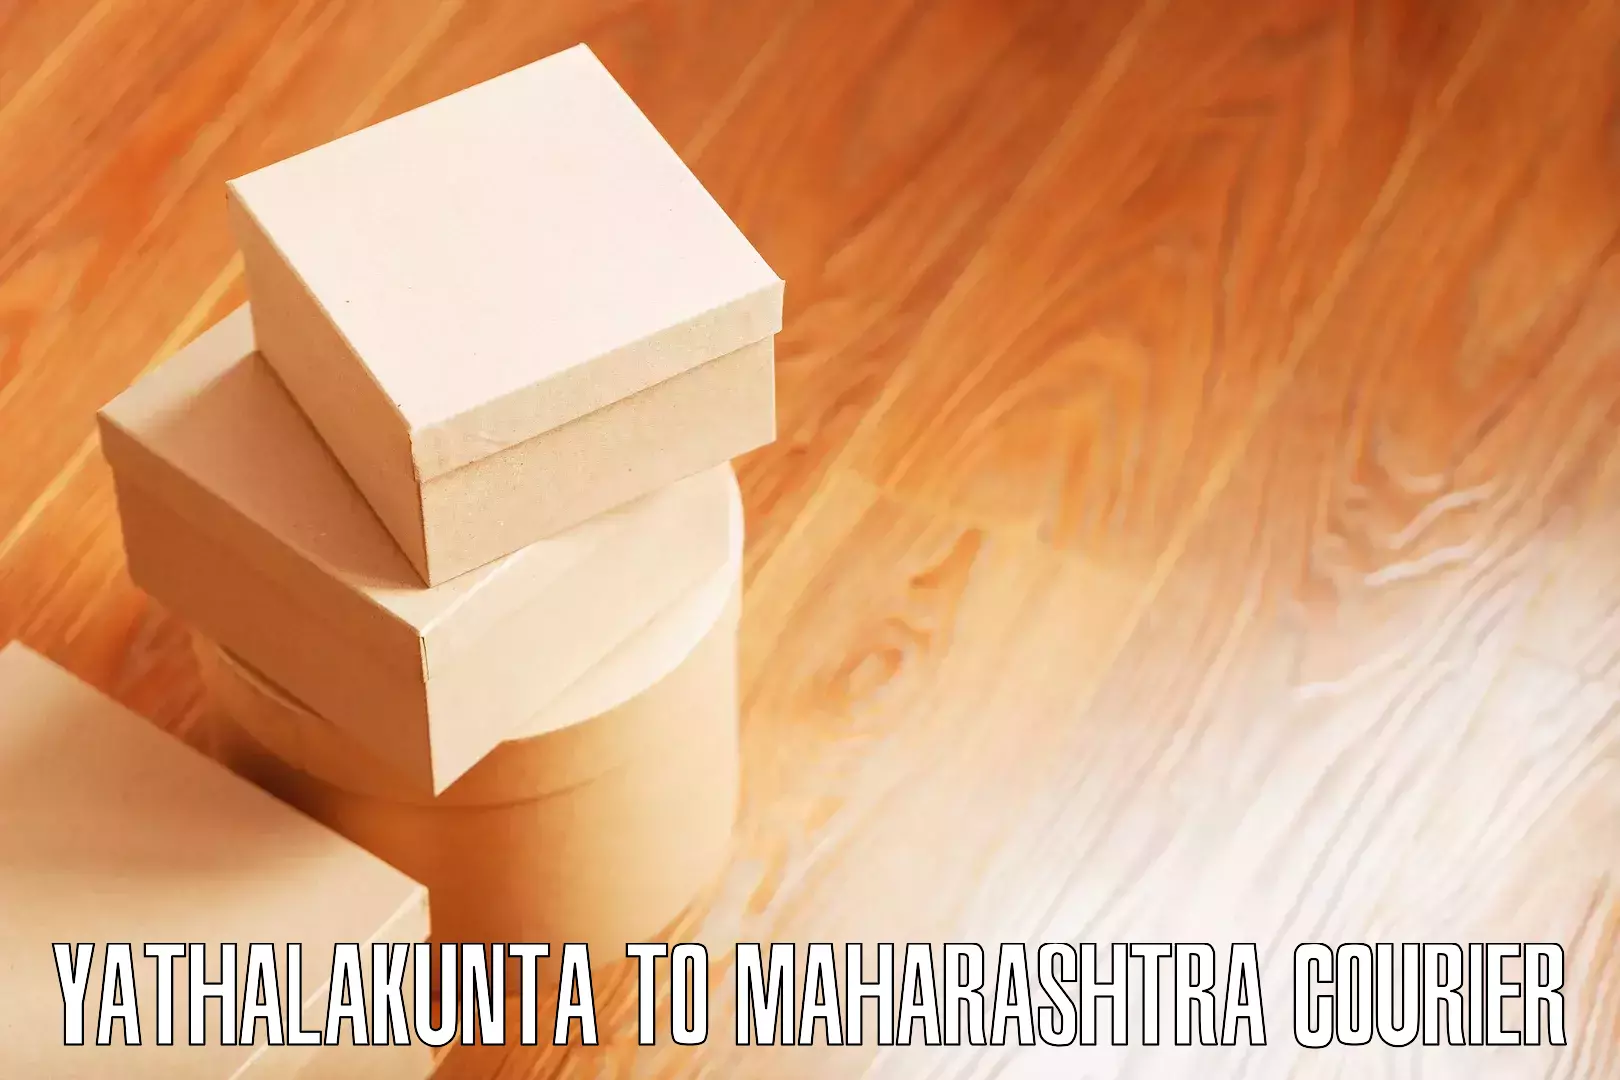 Full home relocation services Yathalakunta to Shrivardhan